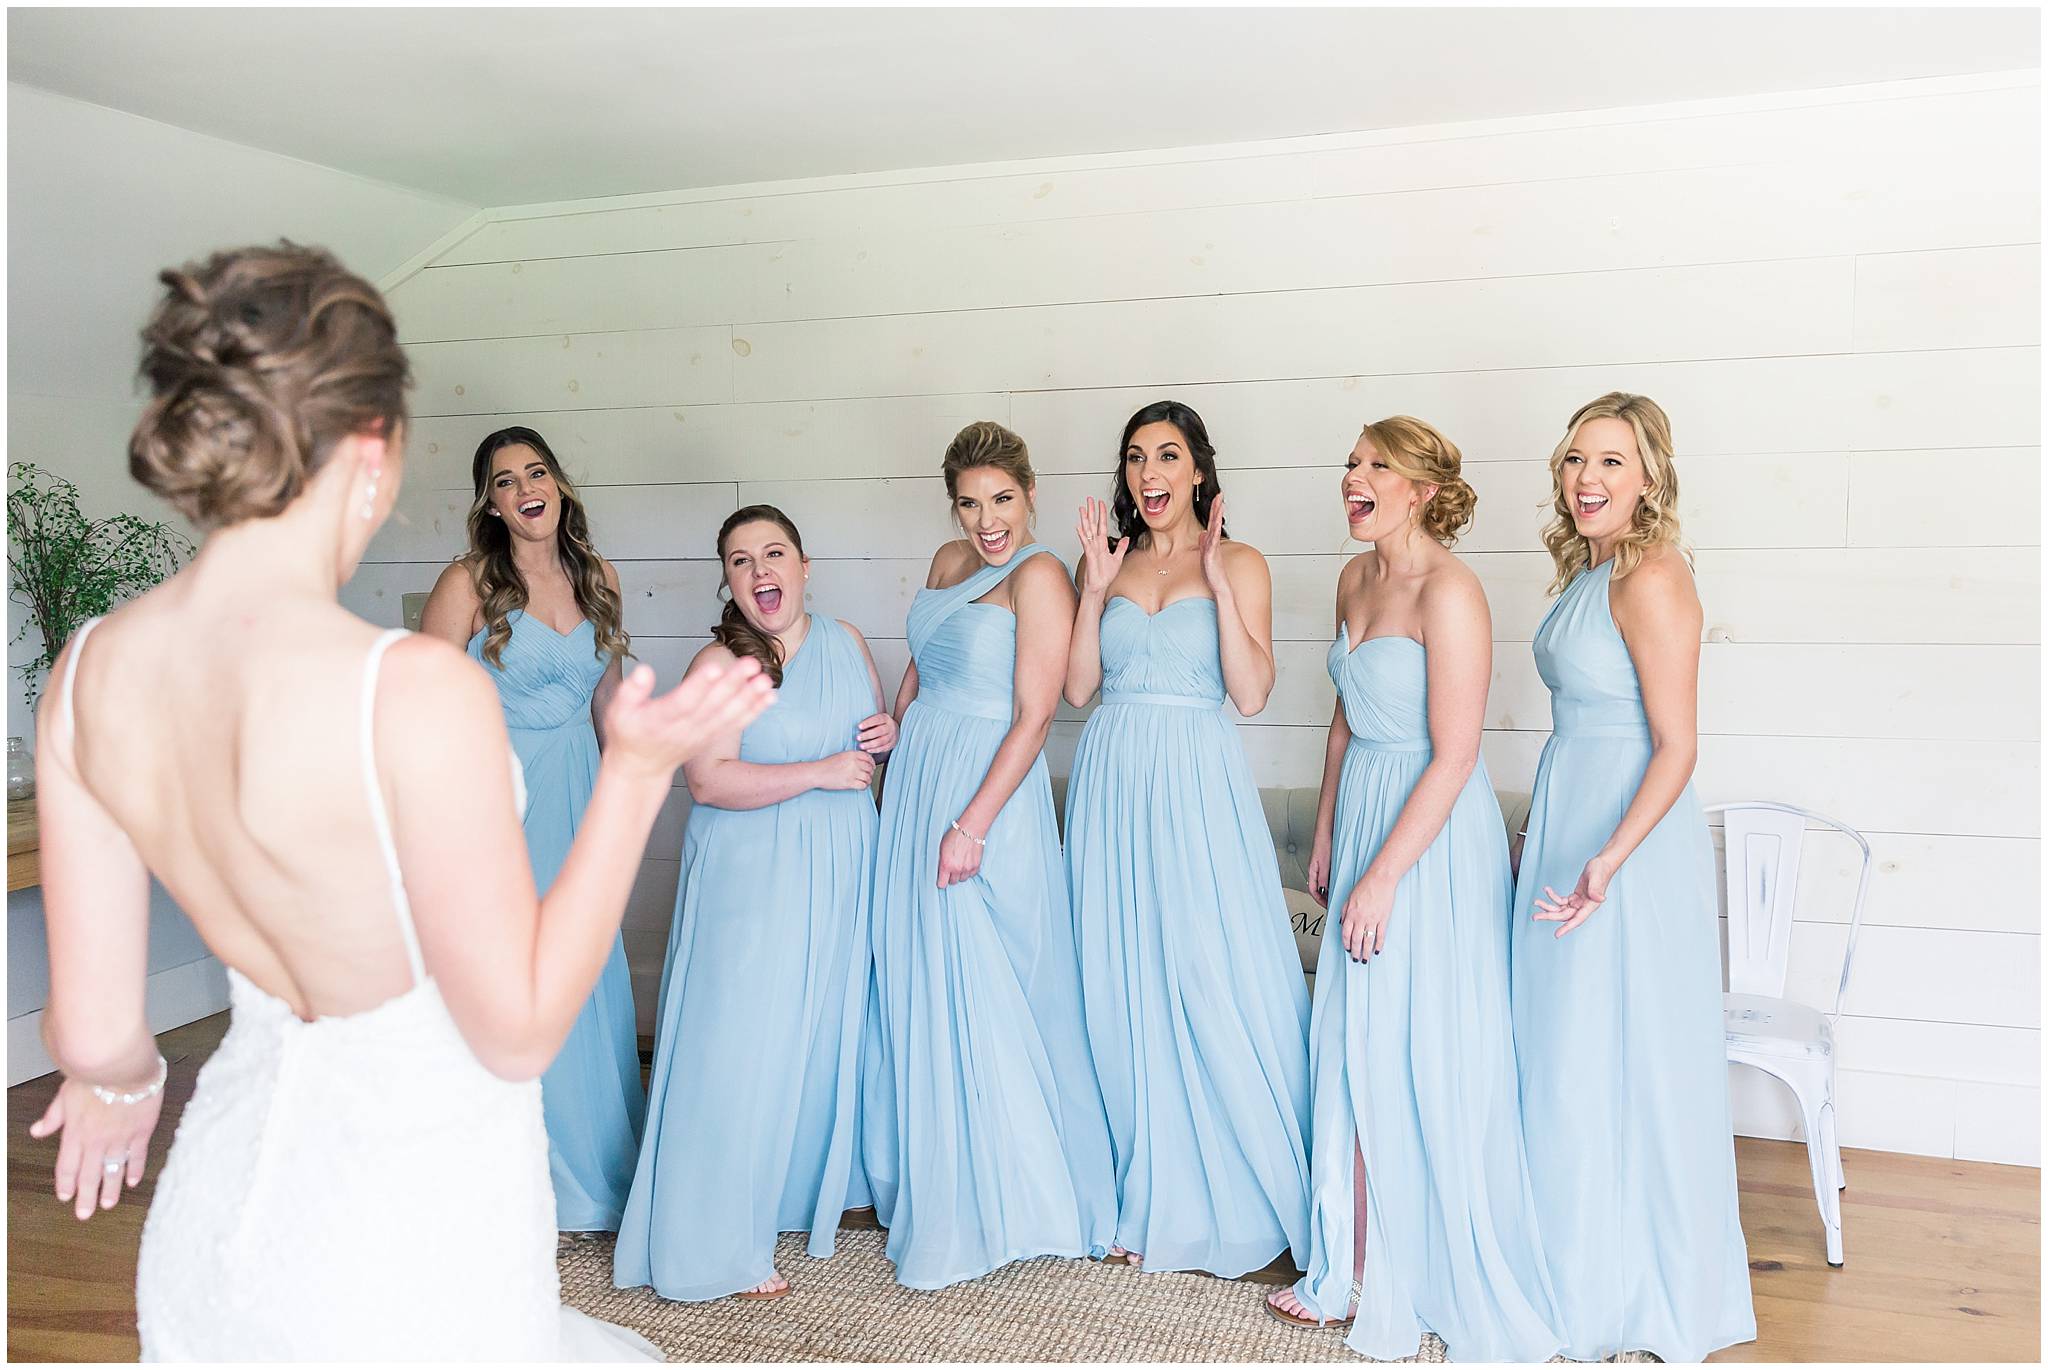 Grant hill farms wedding pictures bridesmaid reveal